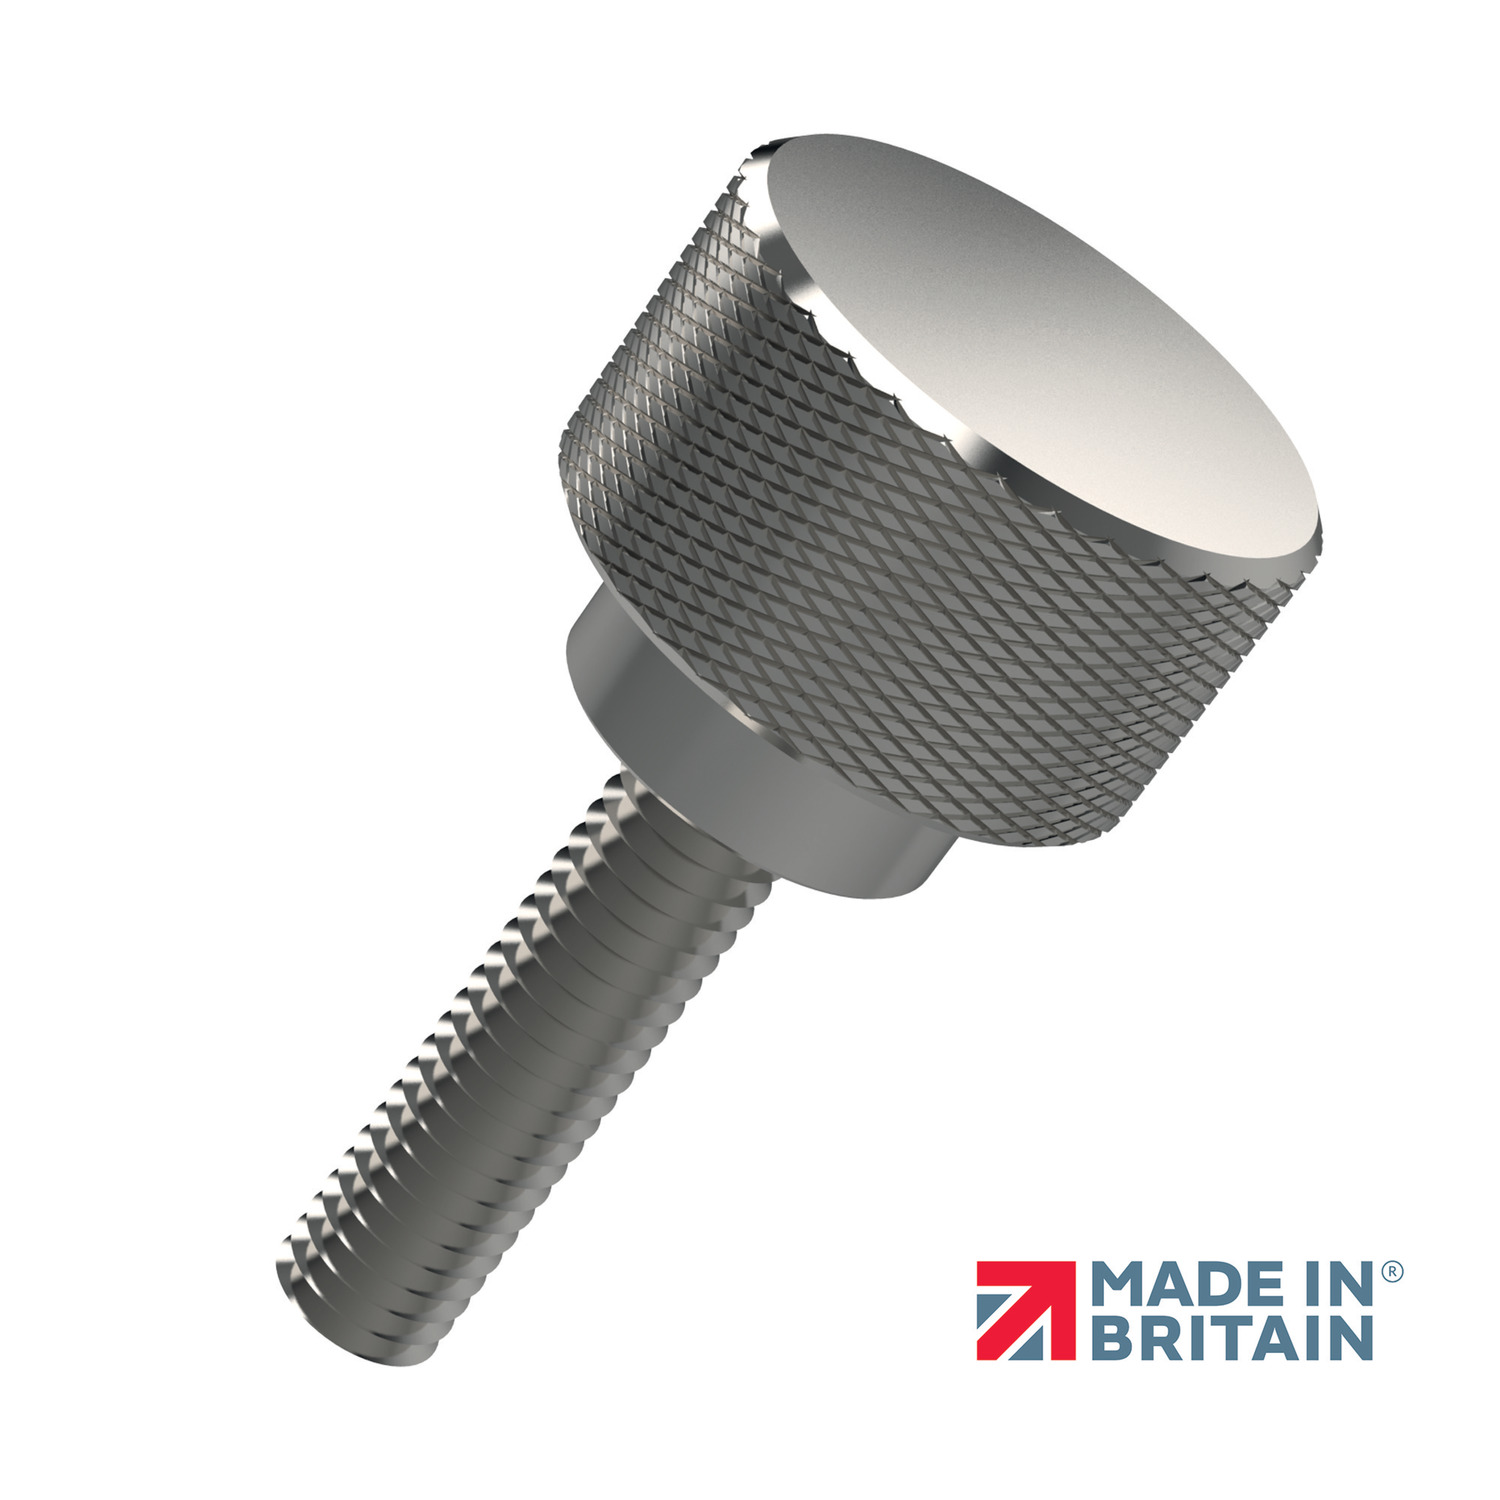 Thumb Screws with Collar A2 and A4 stainless steel knurled thumb screws available from stock. Manufactured tp DIN 464.